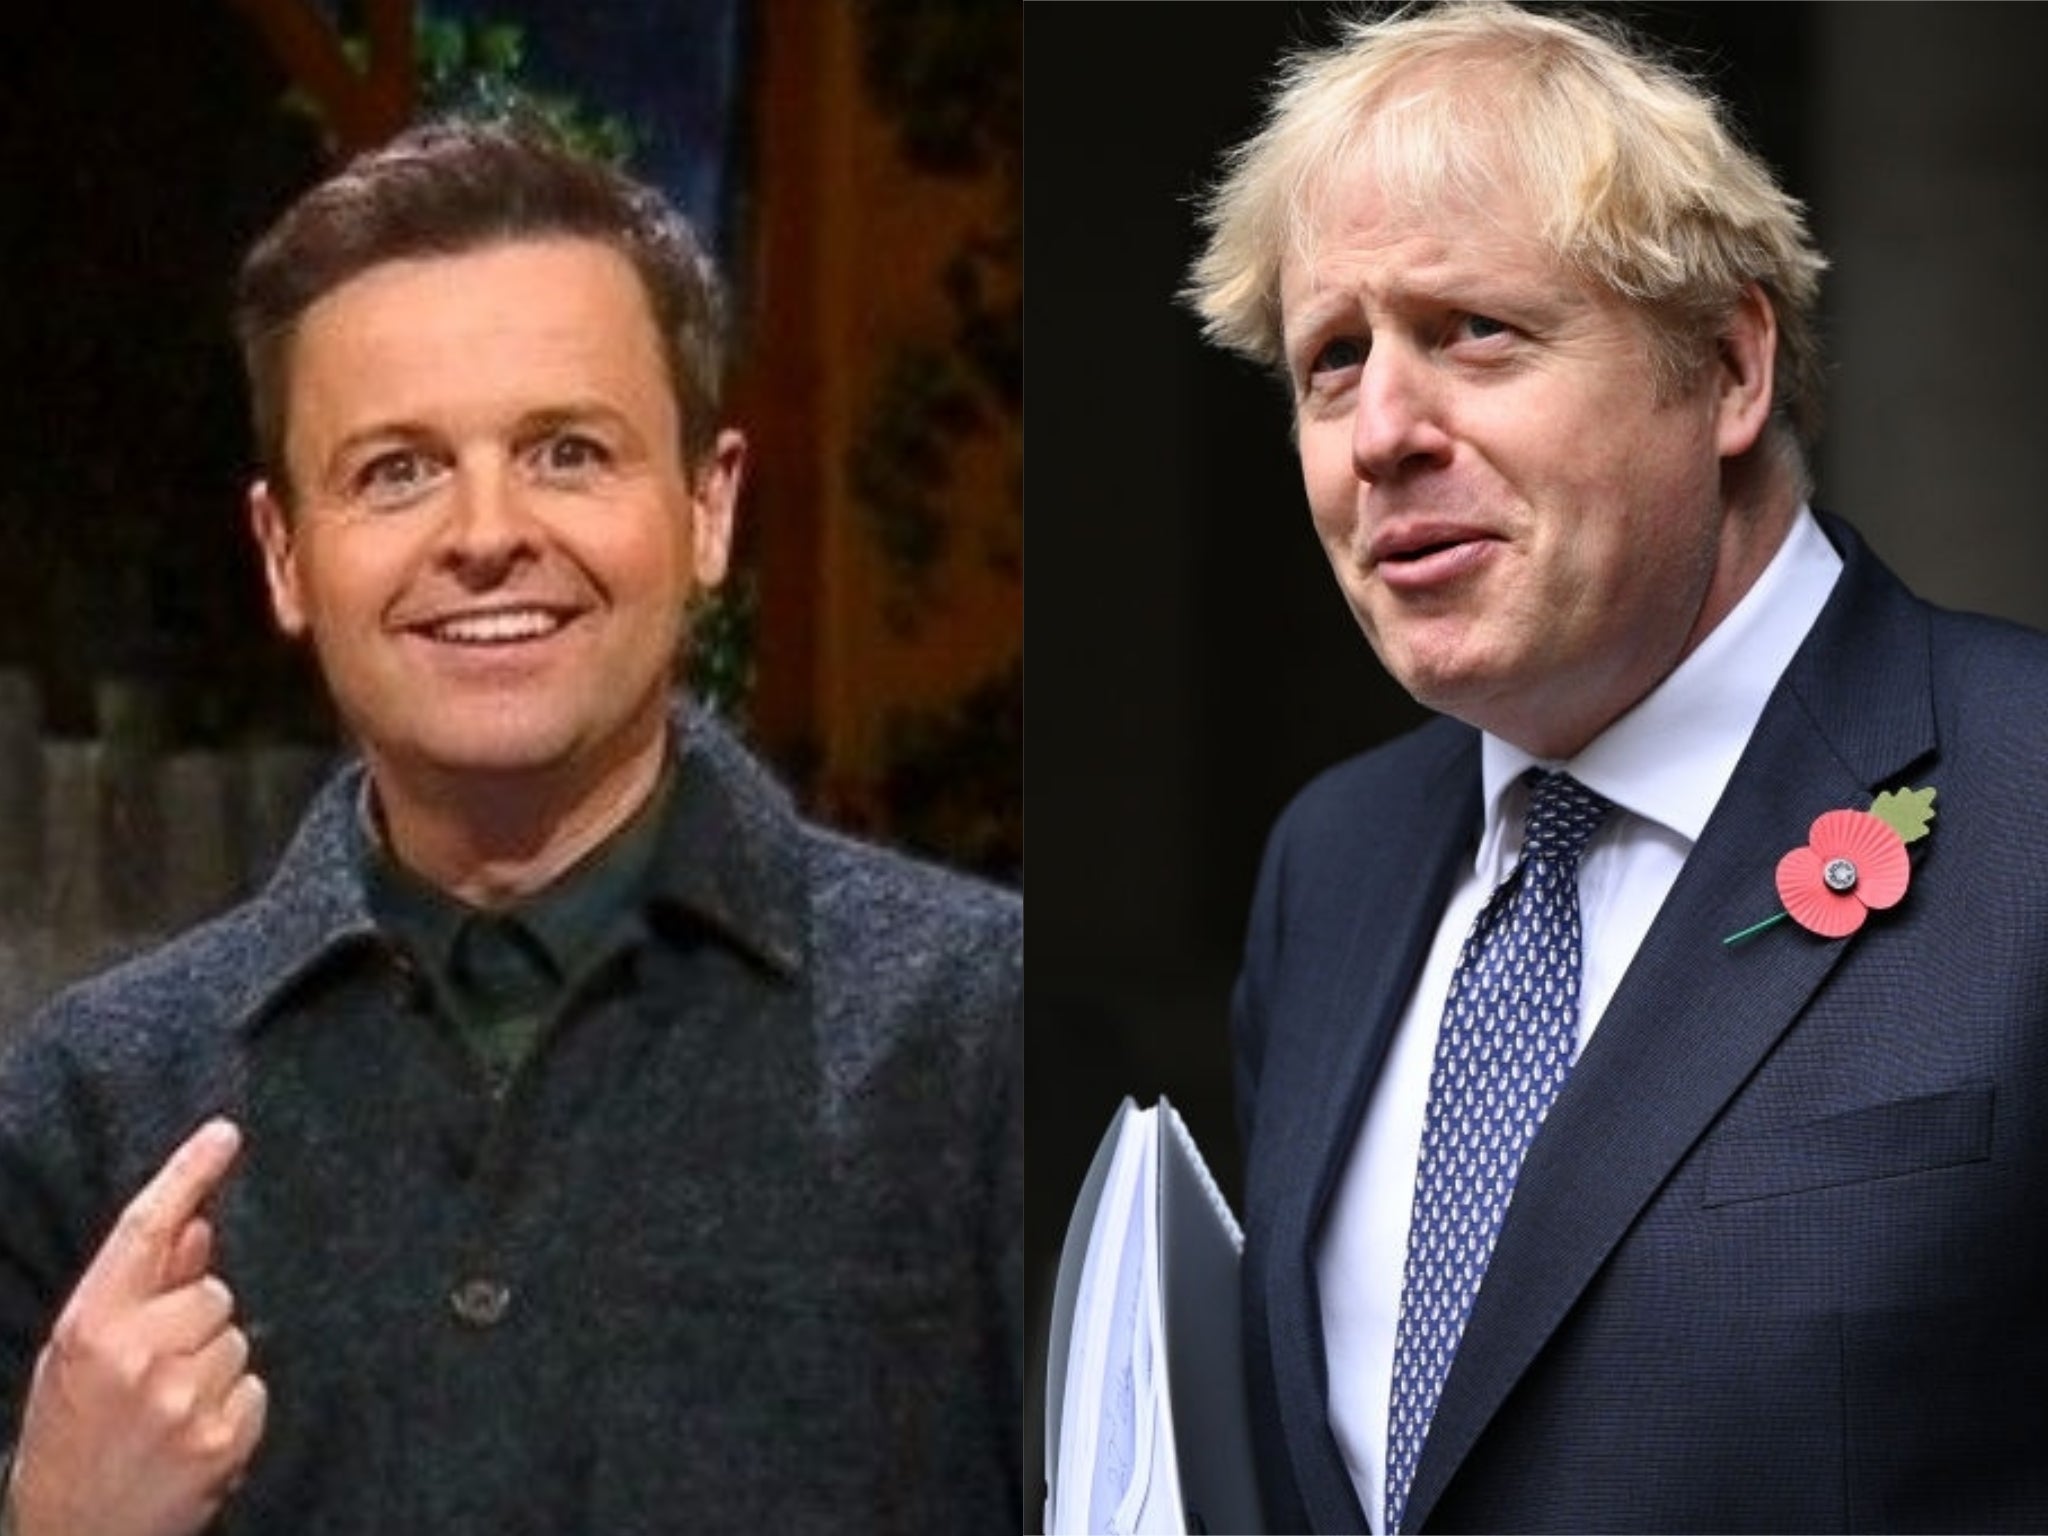 I'm a Celebrity: Ant and Dec poke fun at 'self-isolating' Boris Johnson | The Independent